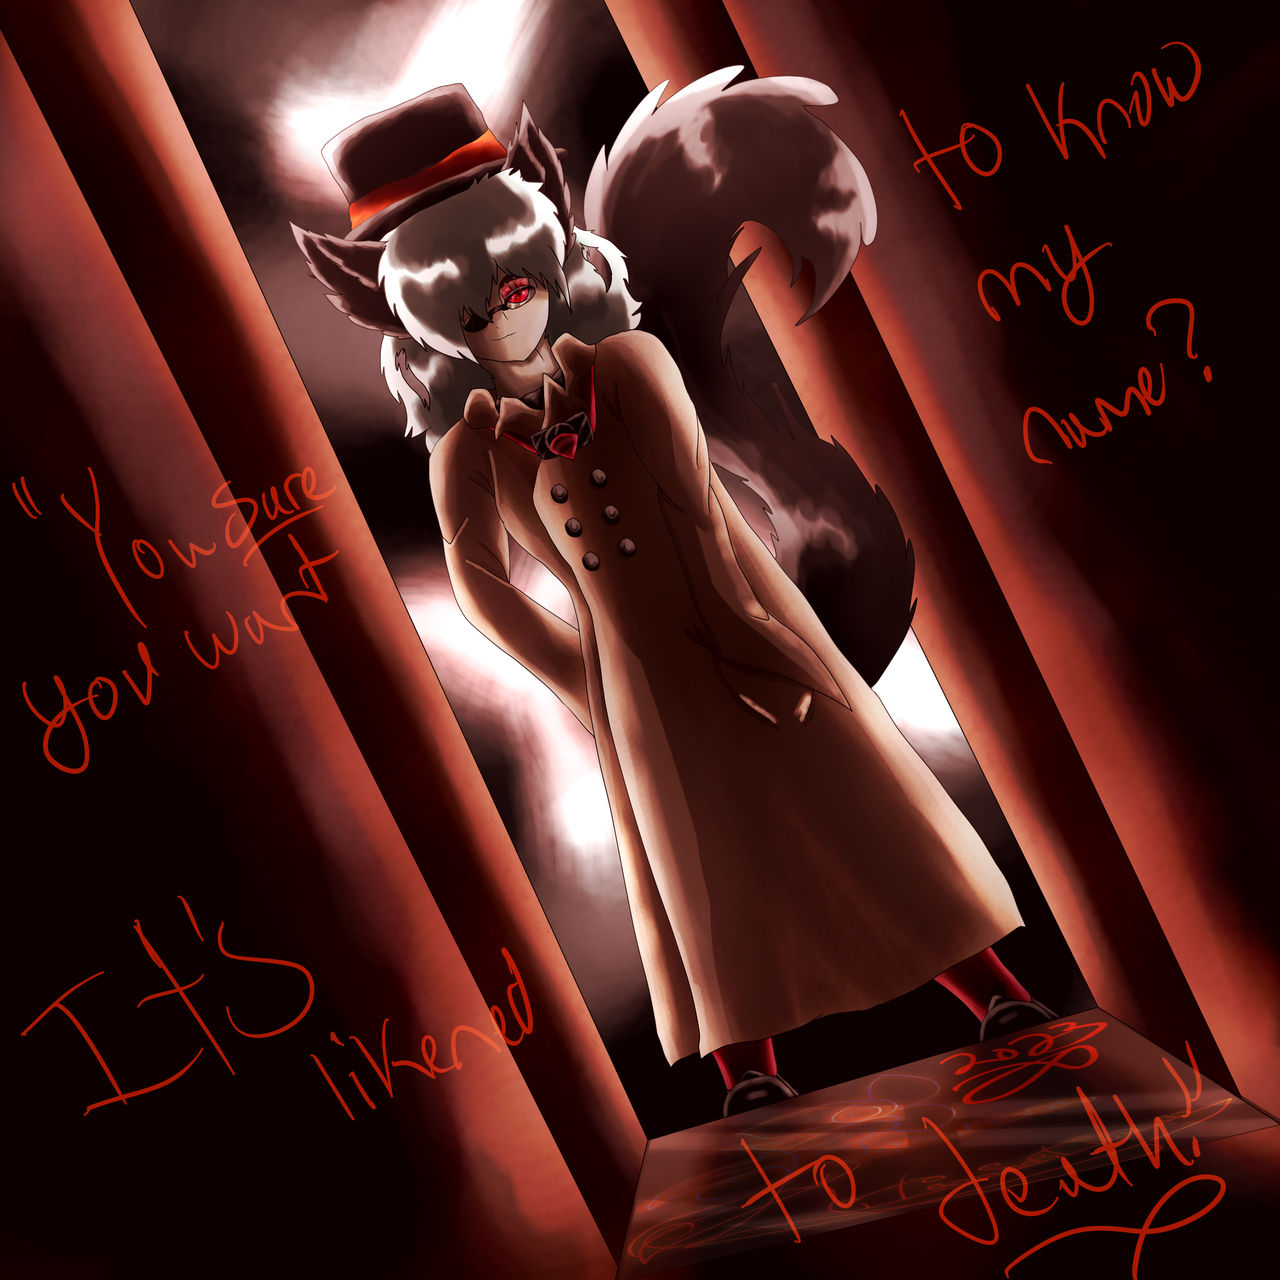 Five Nights at Candy's 3 by TheBetaRoxy on DeviantArt